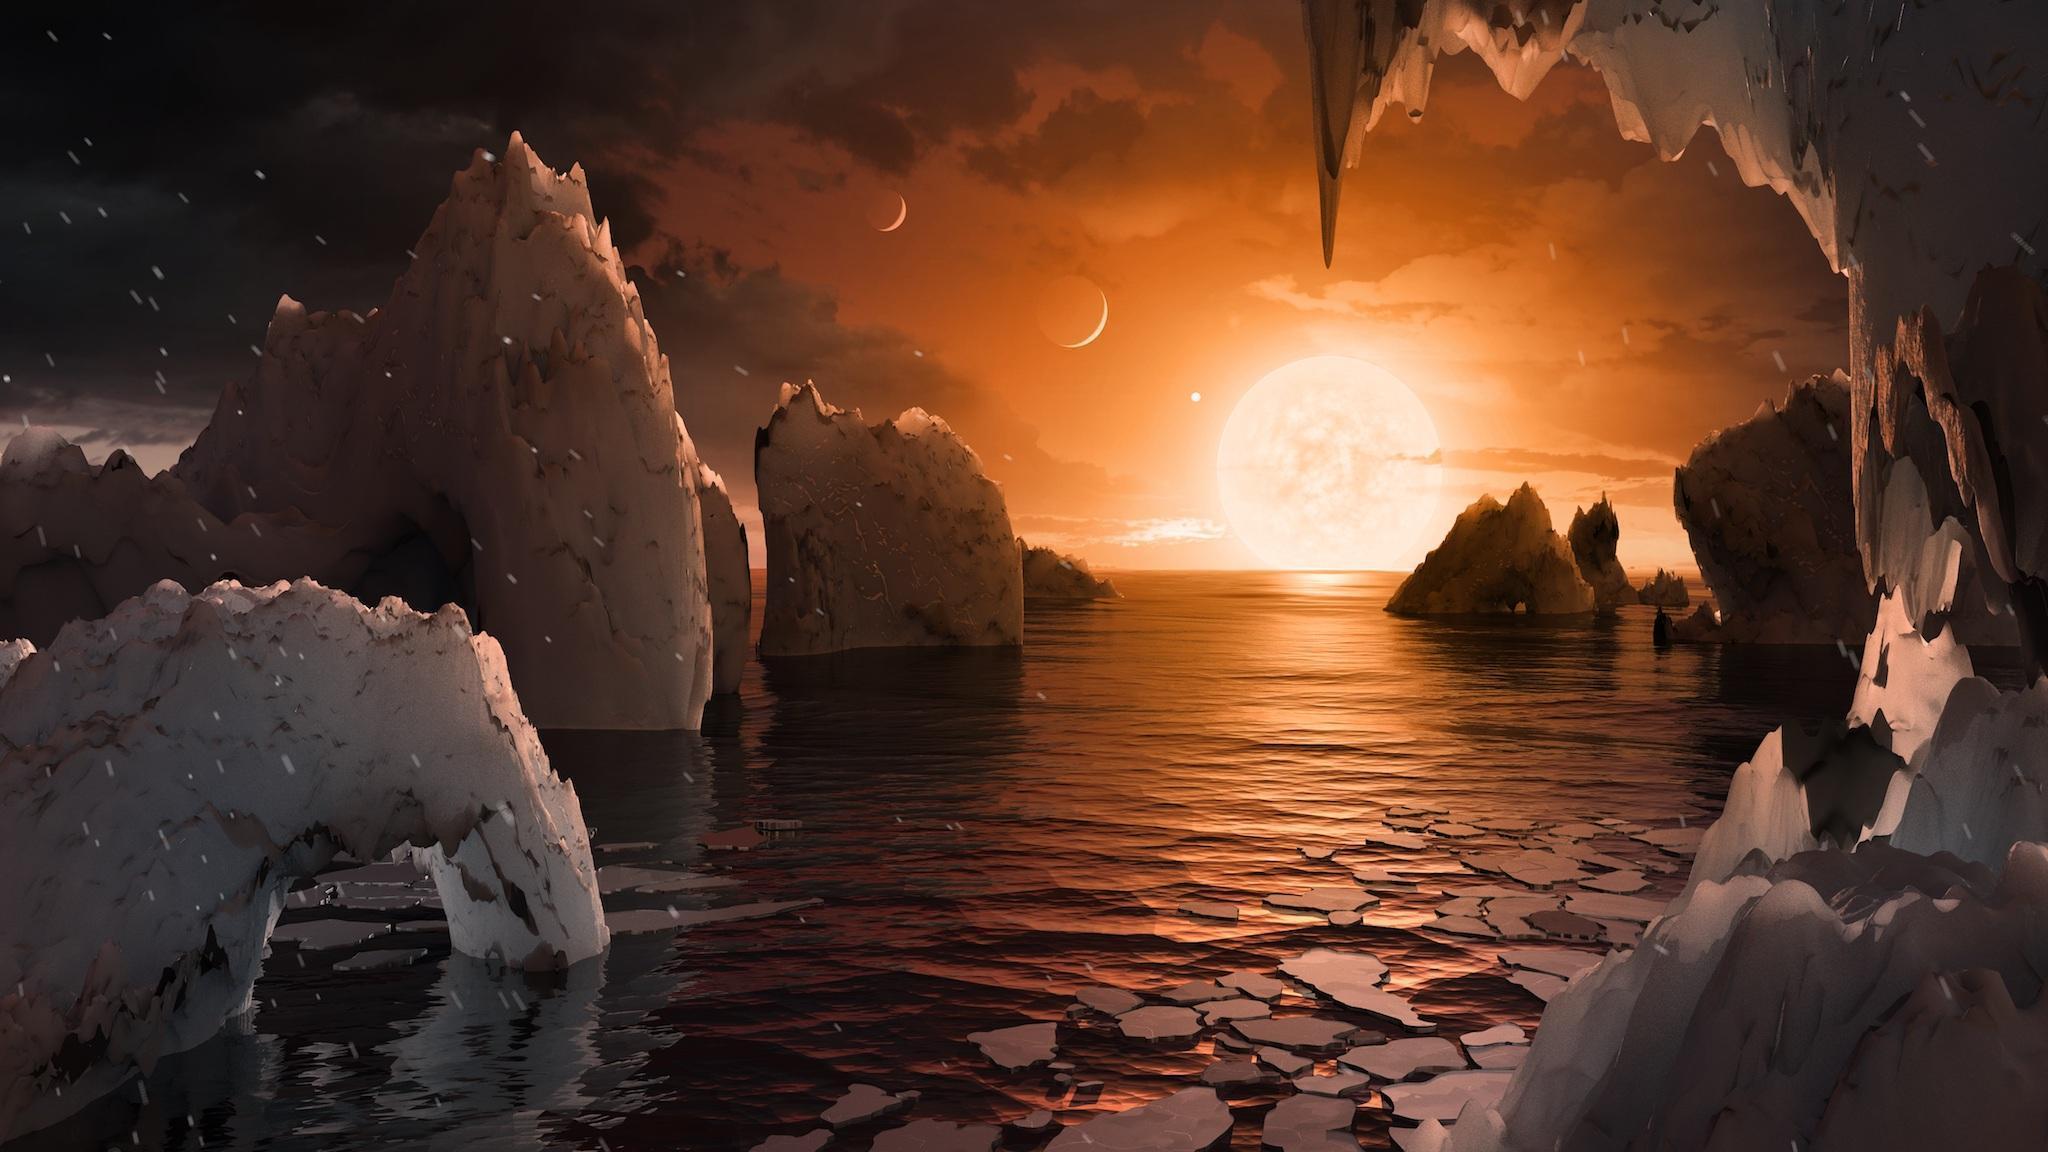 The last time Nasa drummed up such excitement about an exoplanet discovery, it was for the discovery of an entire solar system that could support life